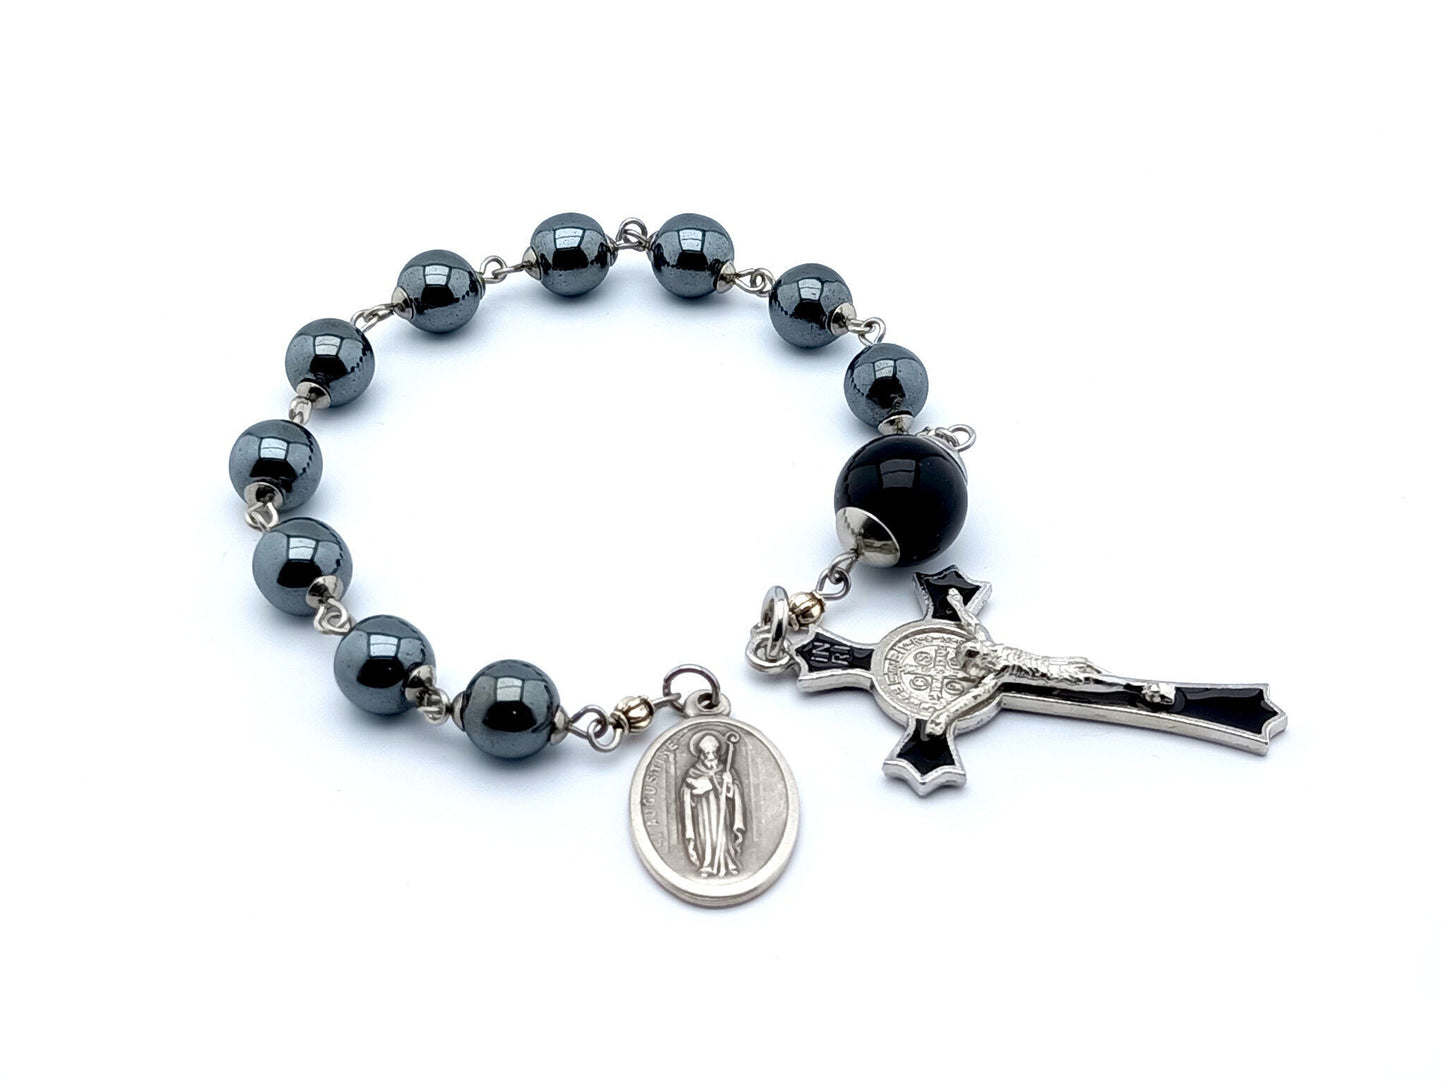 Saint Augustine unique rosary beads single decade rosary with hematite and onyx beads, black and silver enamel crucifix and end medal.